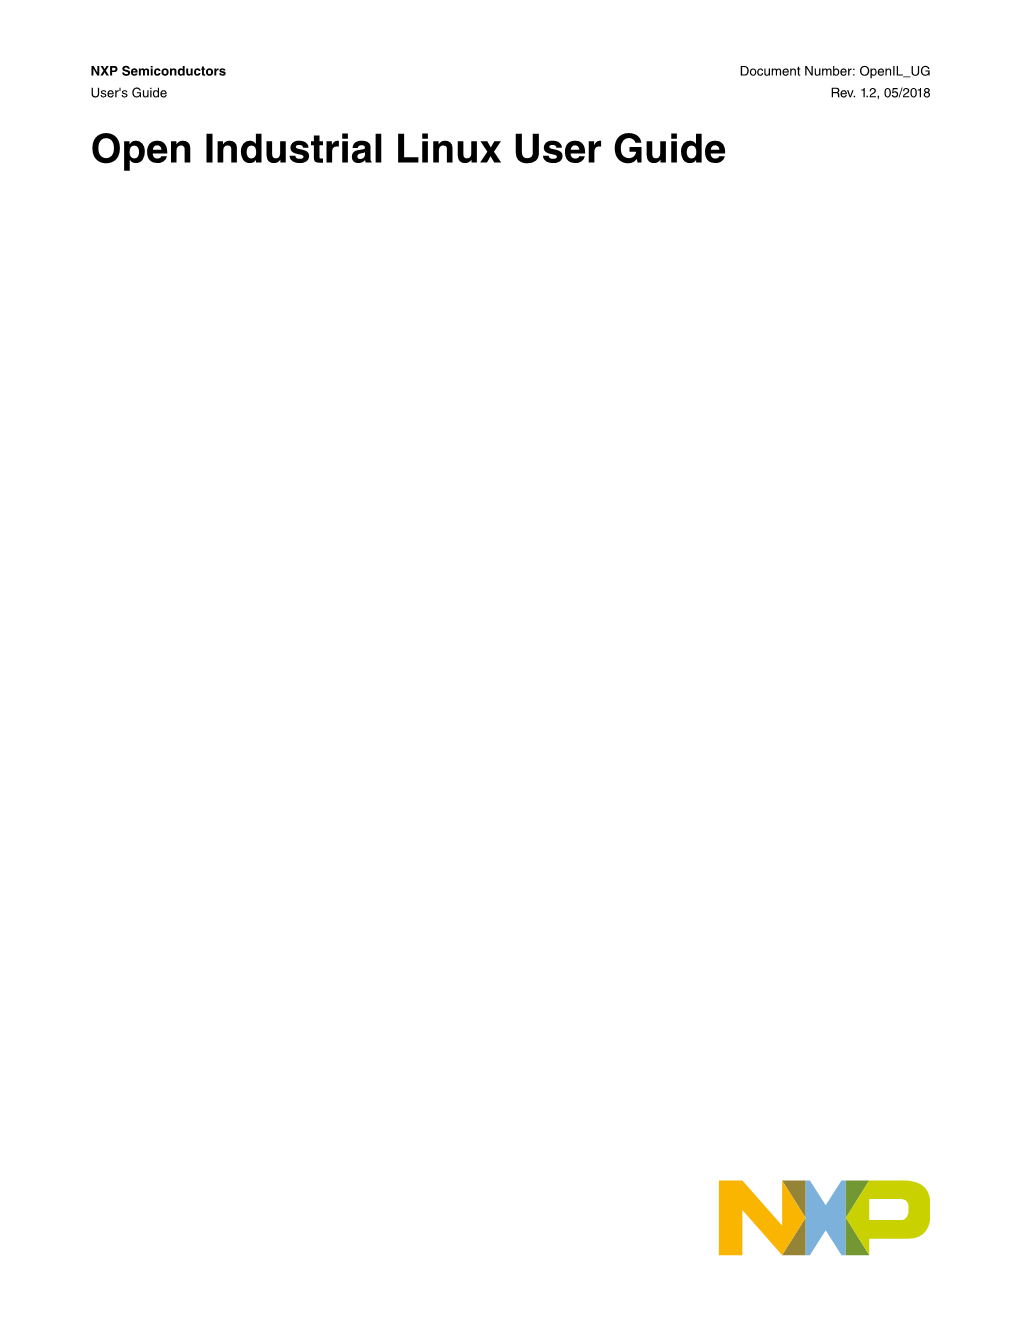 Open Industrial Linux User Guide Contents